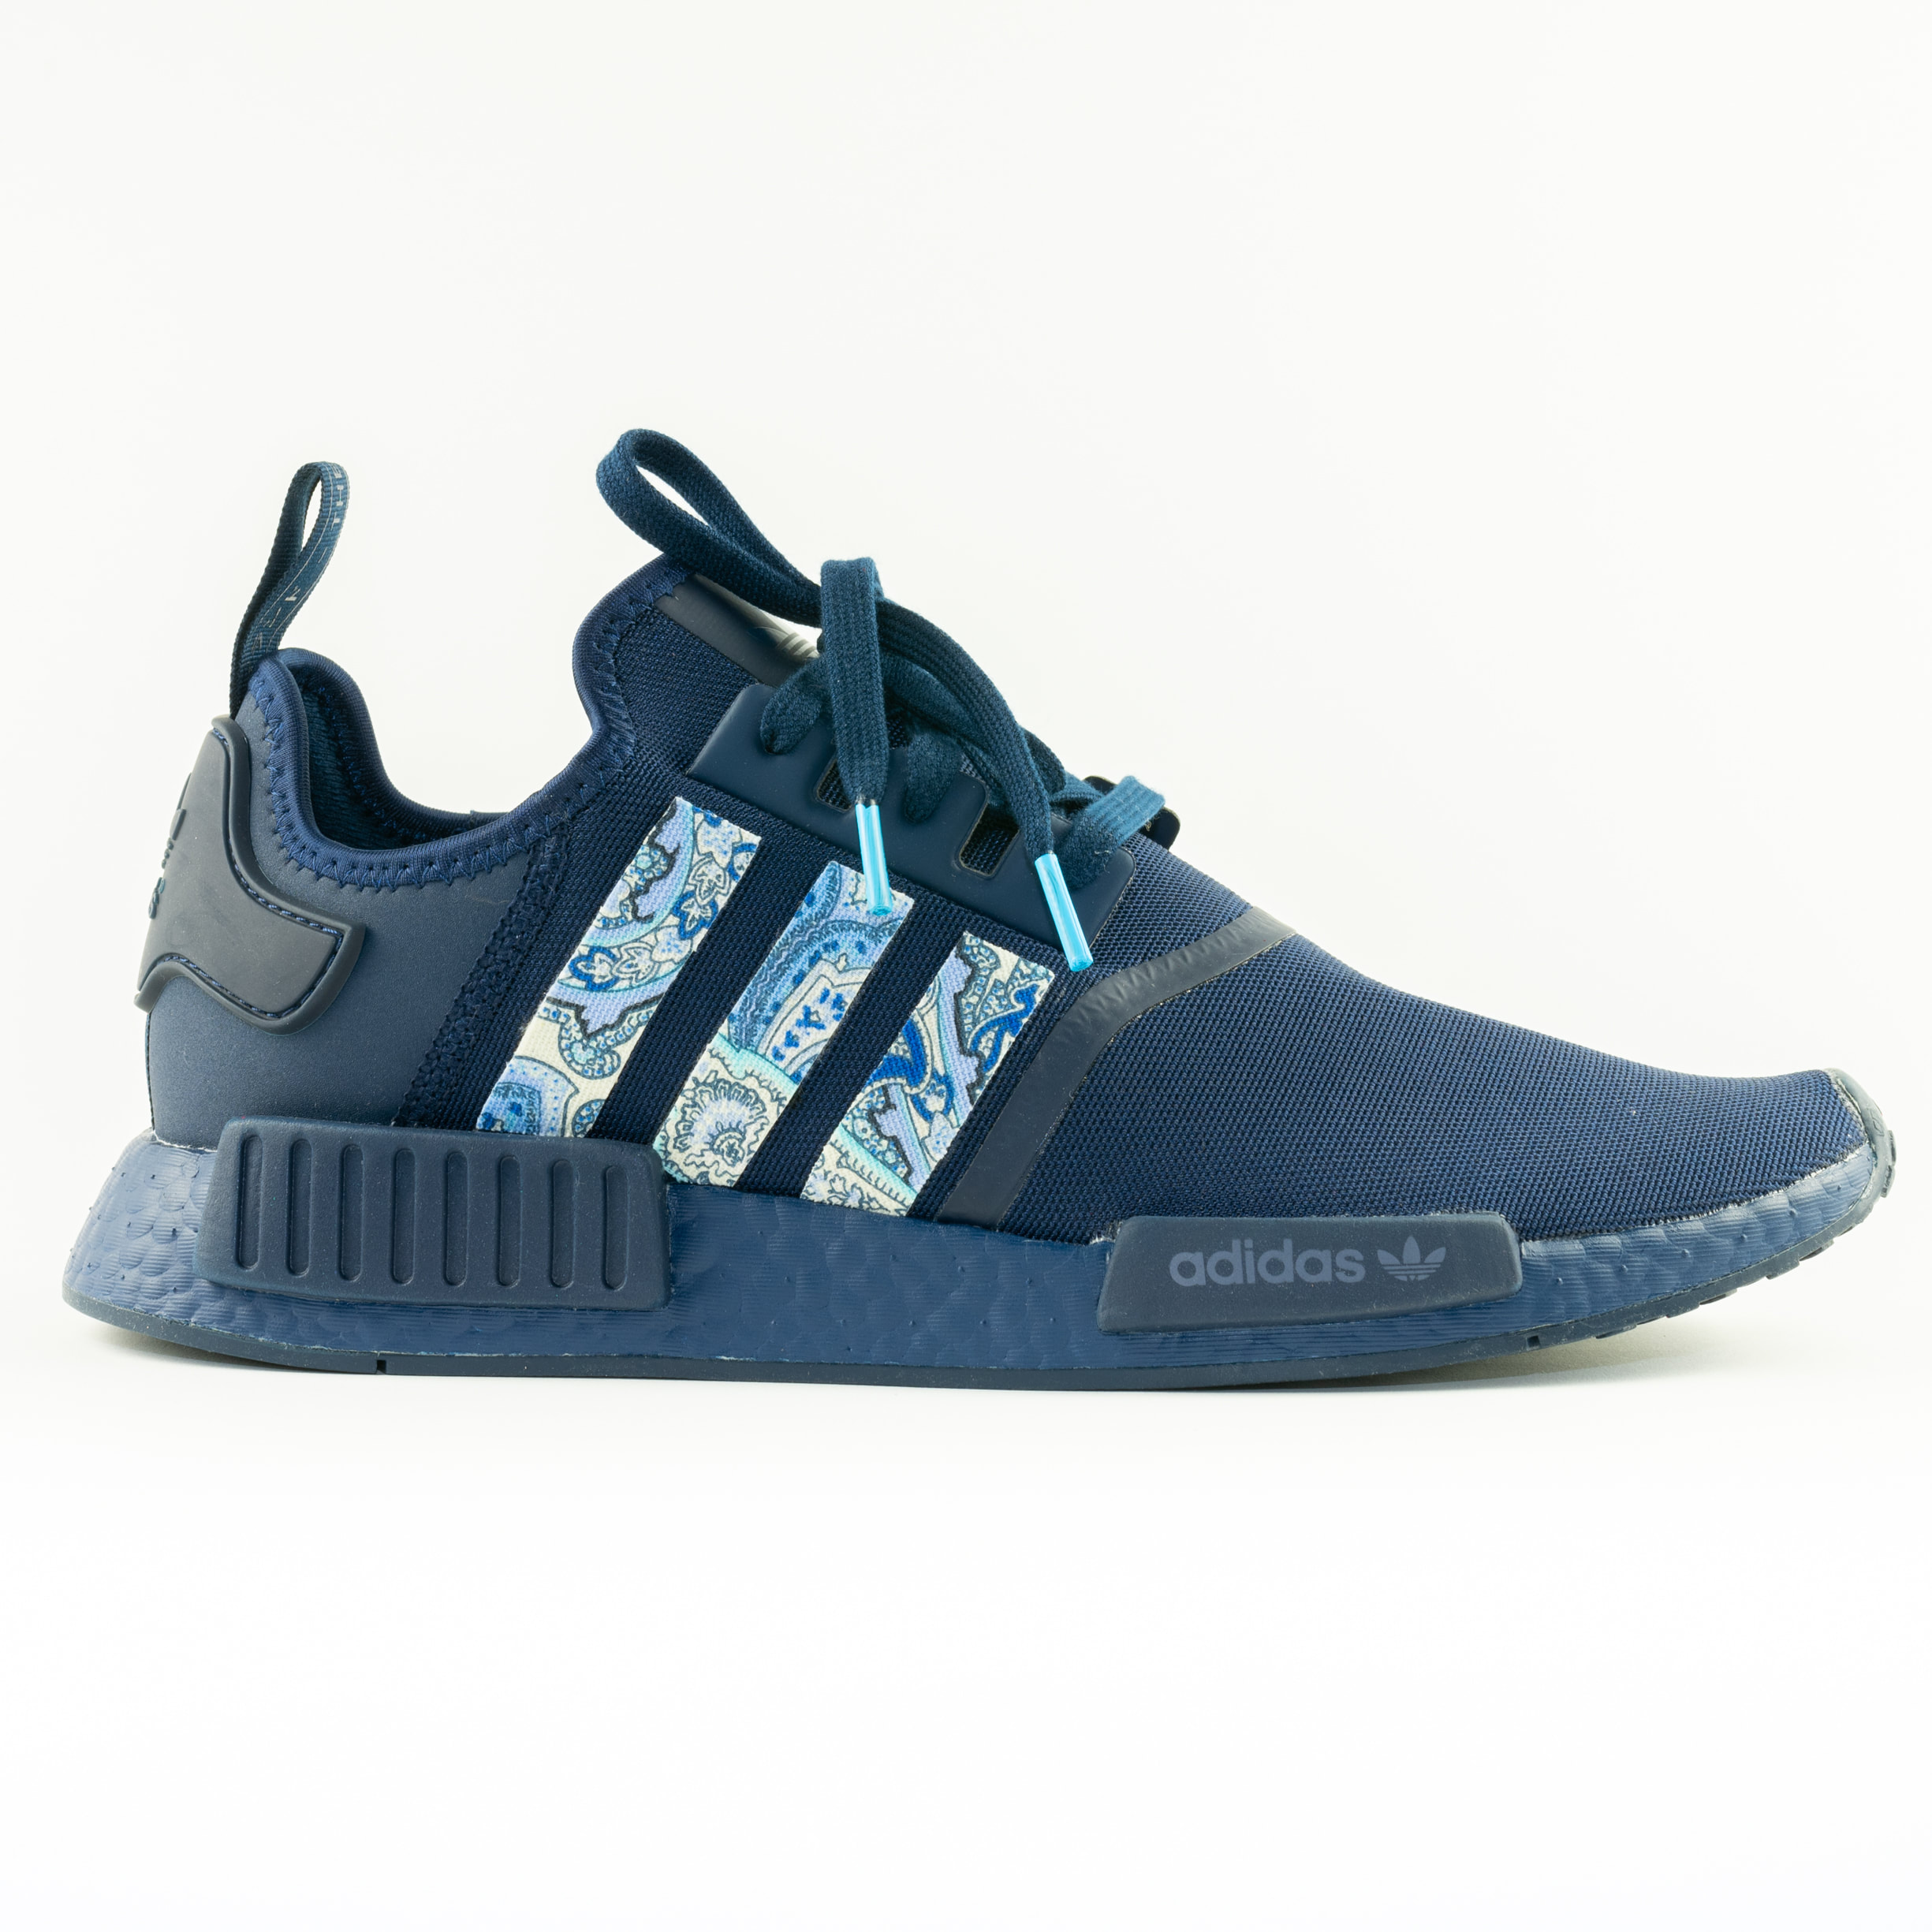 customize nmd r1 shoes